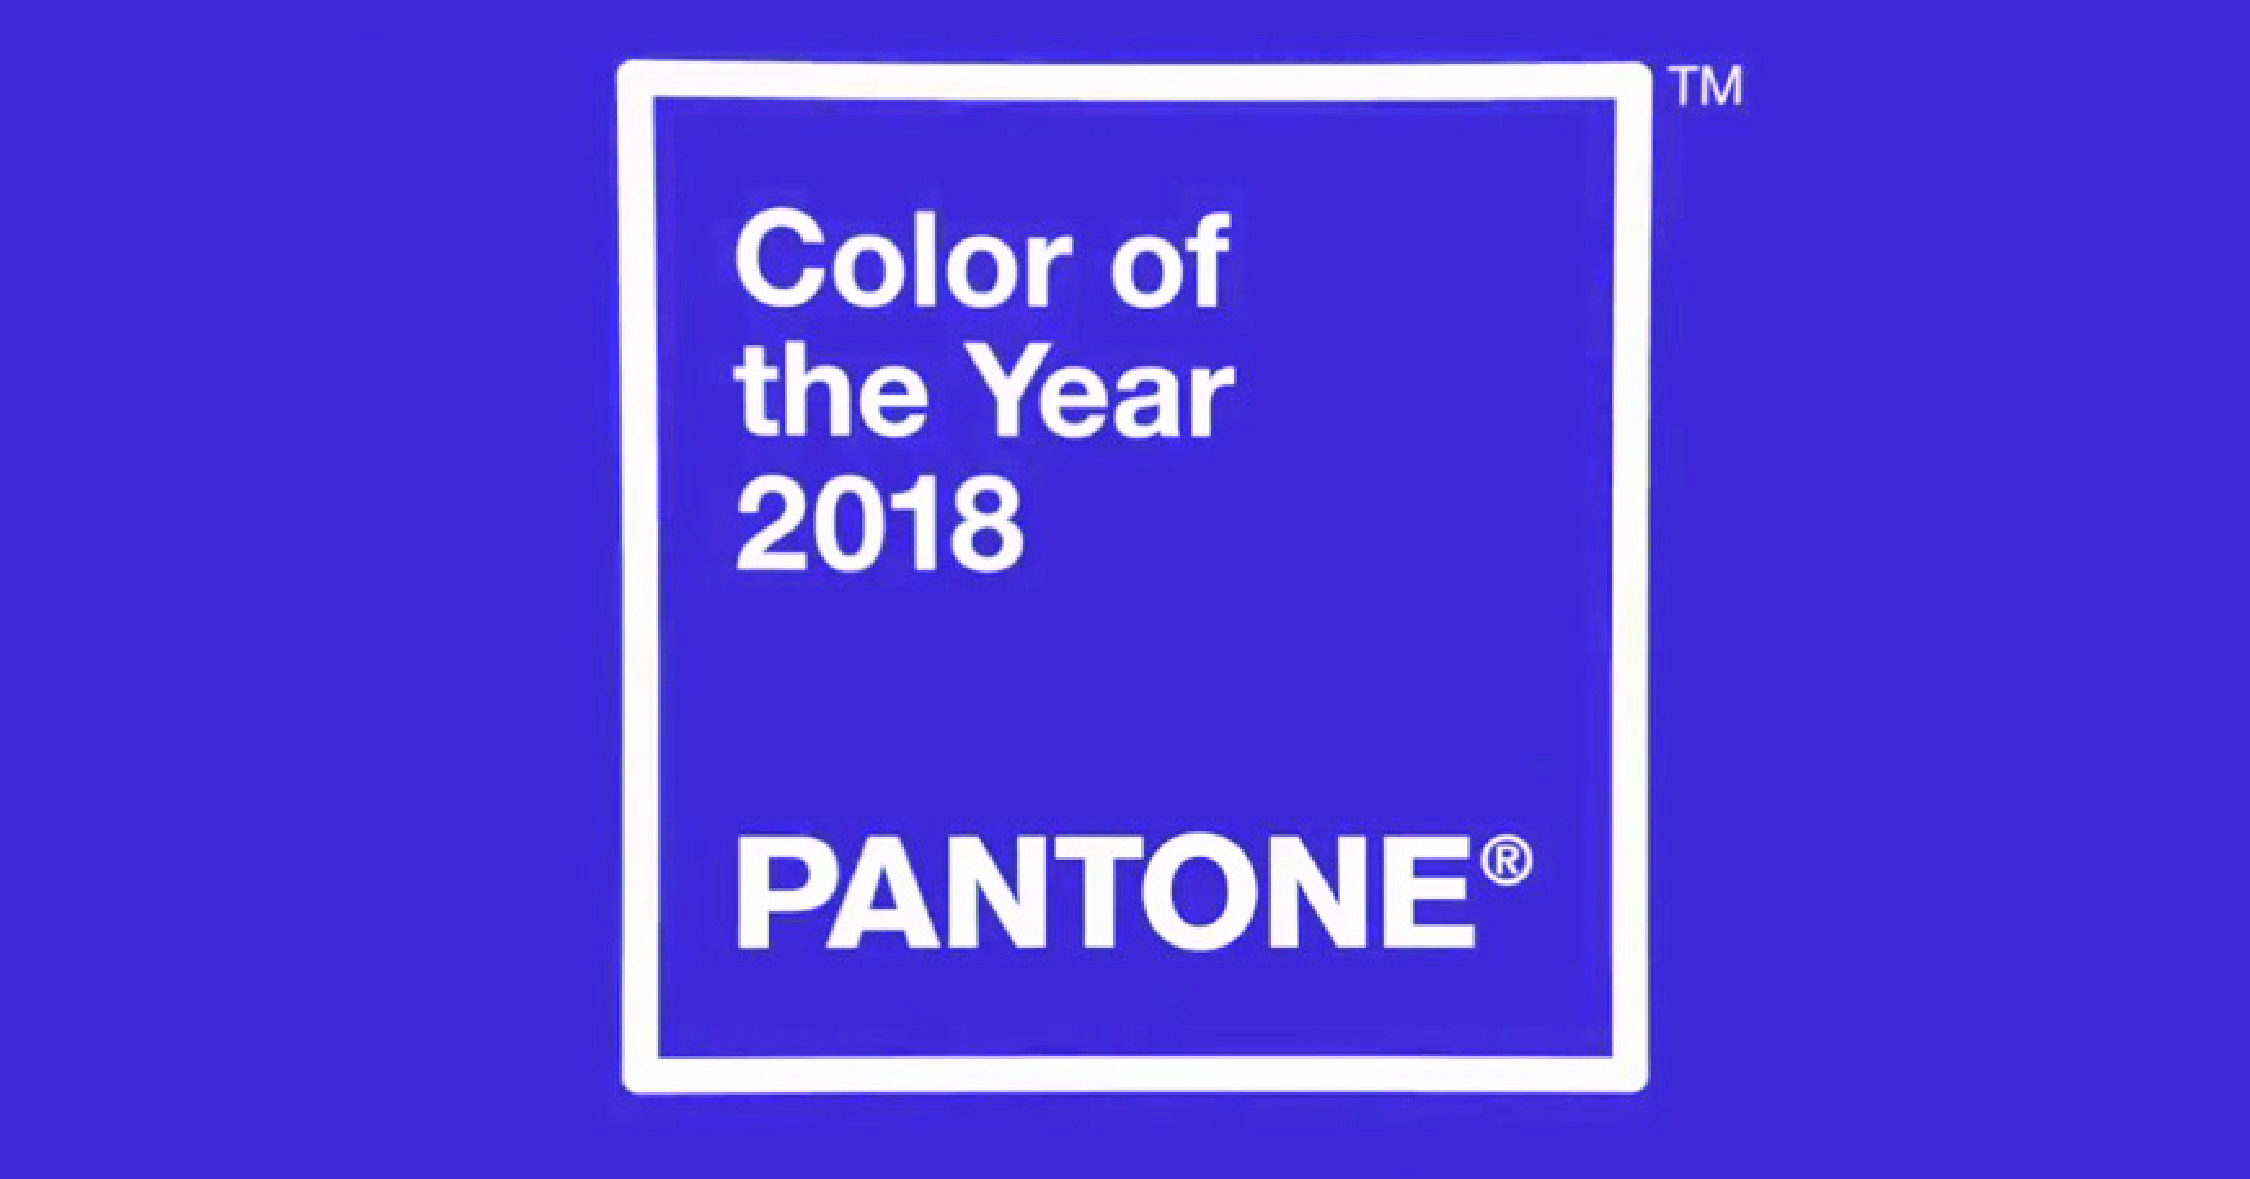 Empower Your Packaging with Pantone's Color of the Year 2018